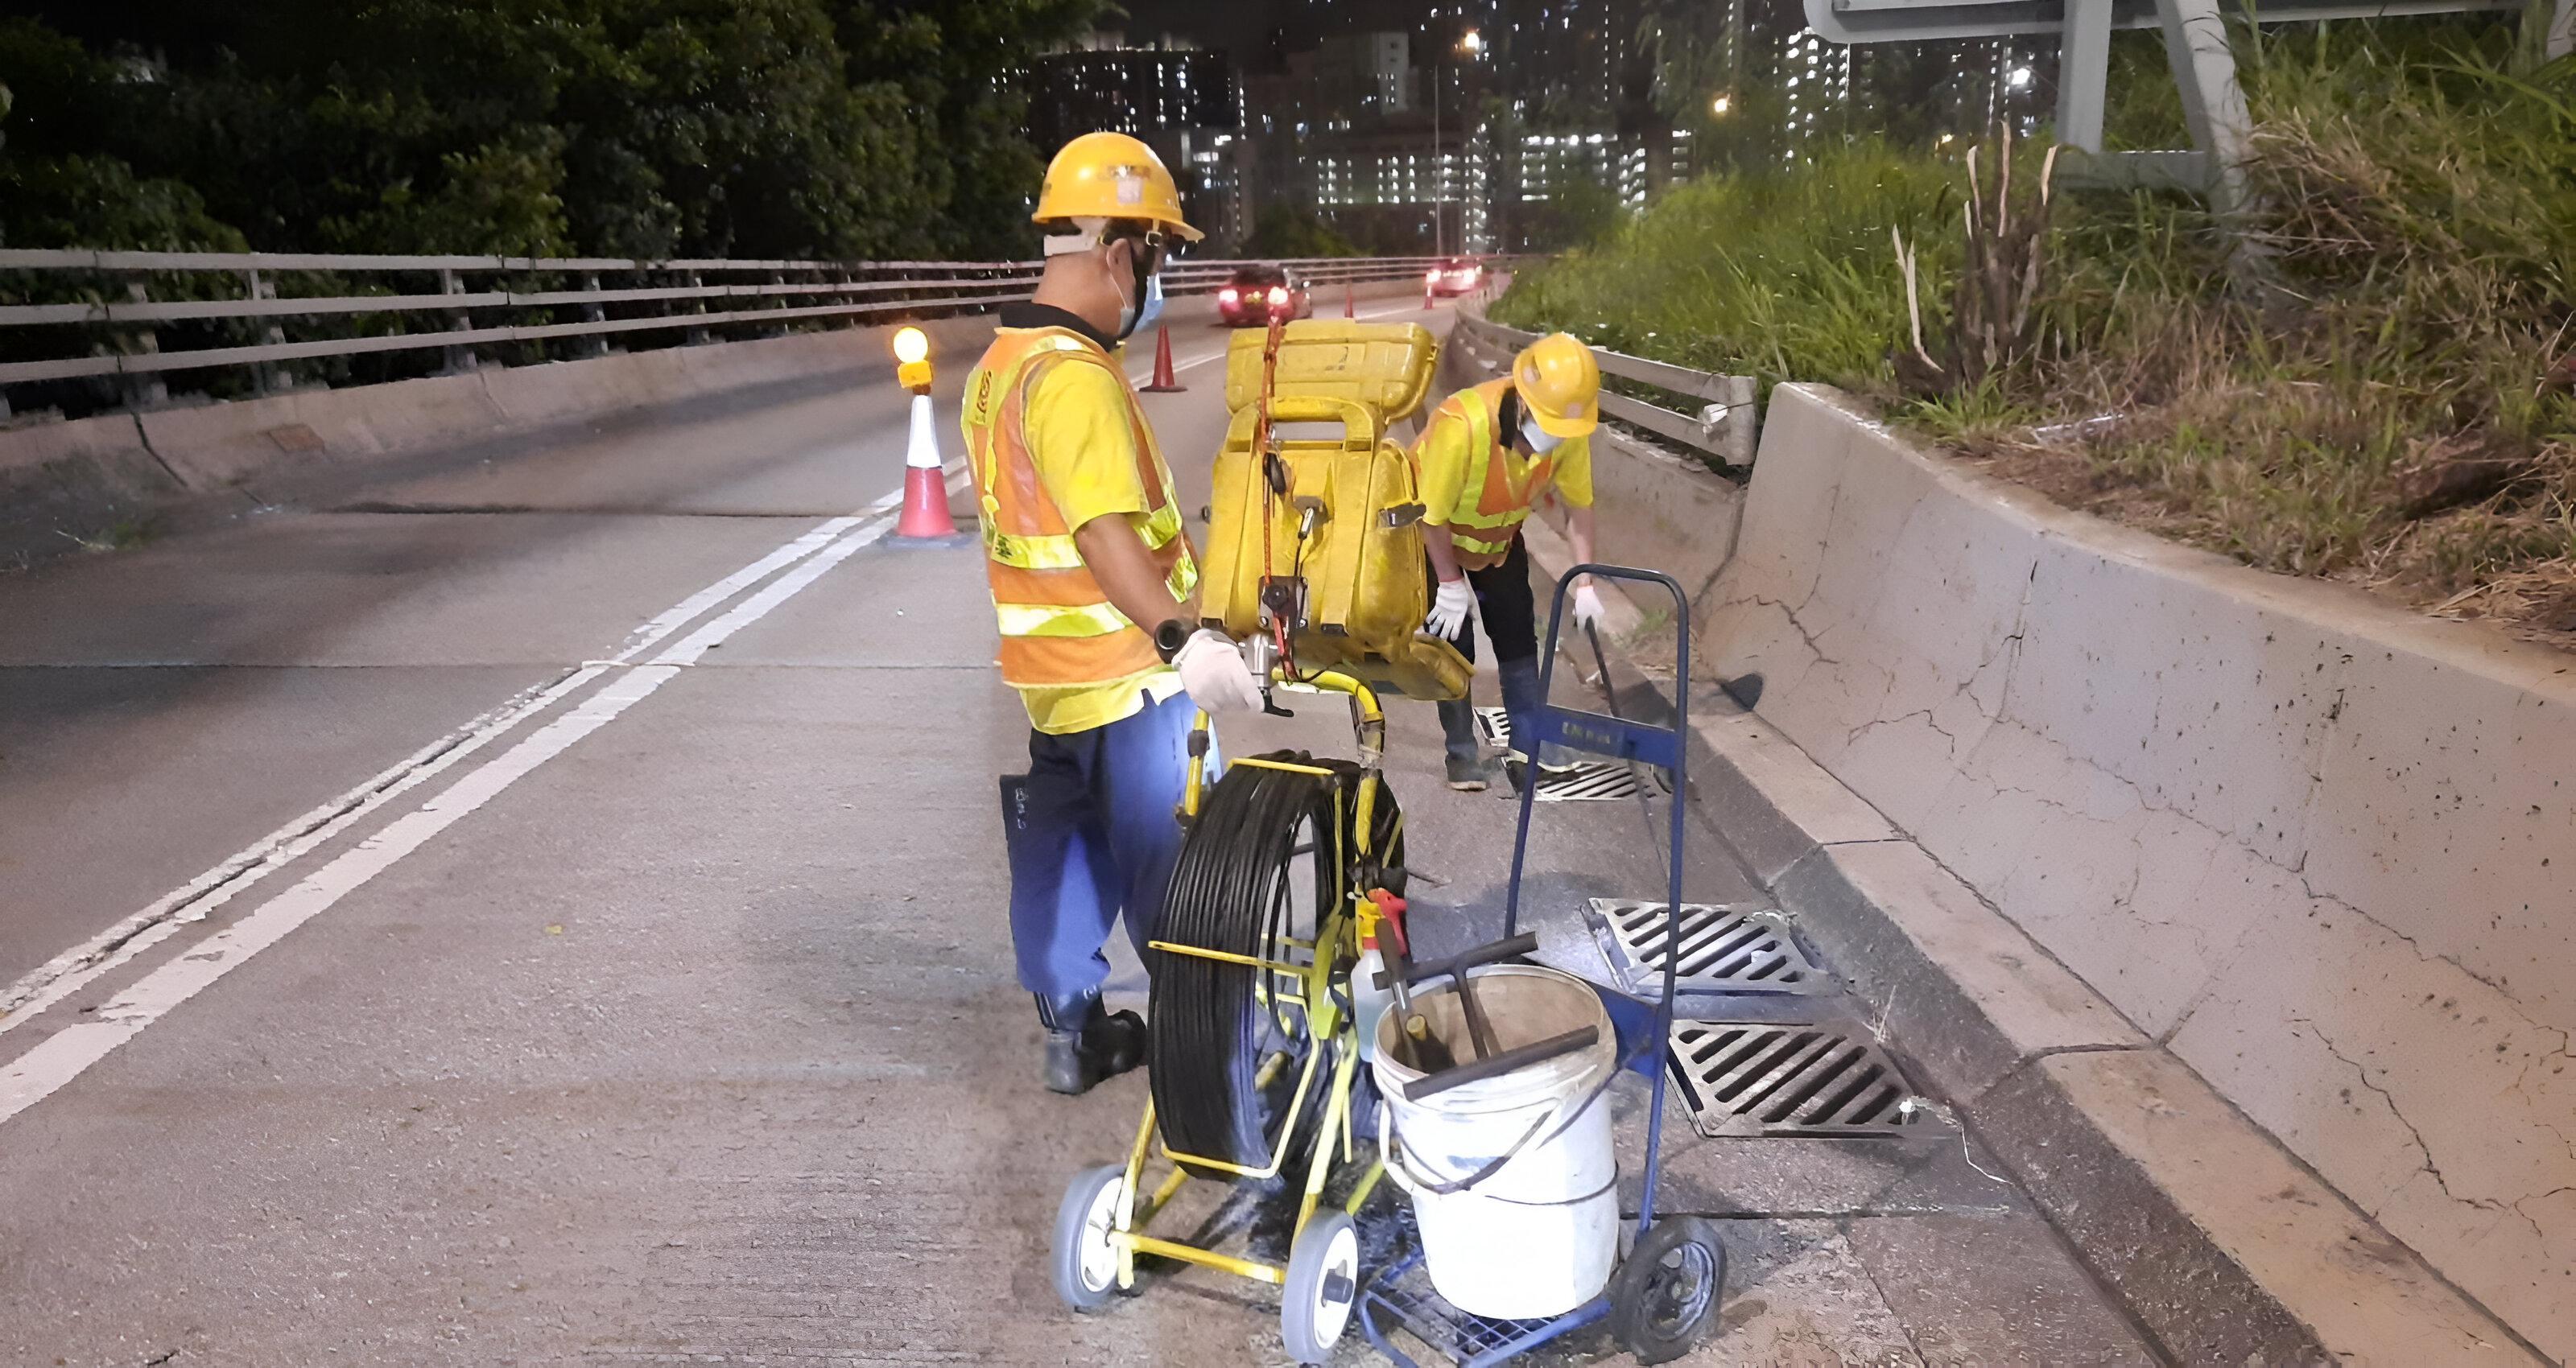 The Emergency Control Centres of the Highways Department today (March 17) conducted a drill to enhance the capability to cope with inclement weather. Photo shows staff members of a contractor inspecting a gully by closed-circuit television before the drill to ensure the drain is free from blockage.